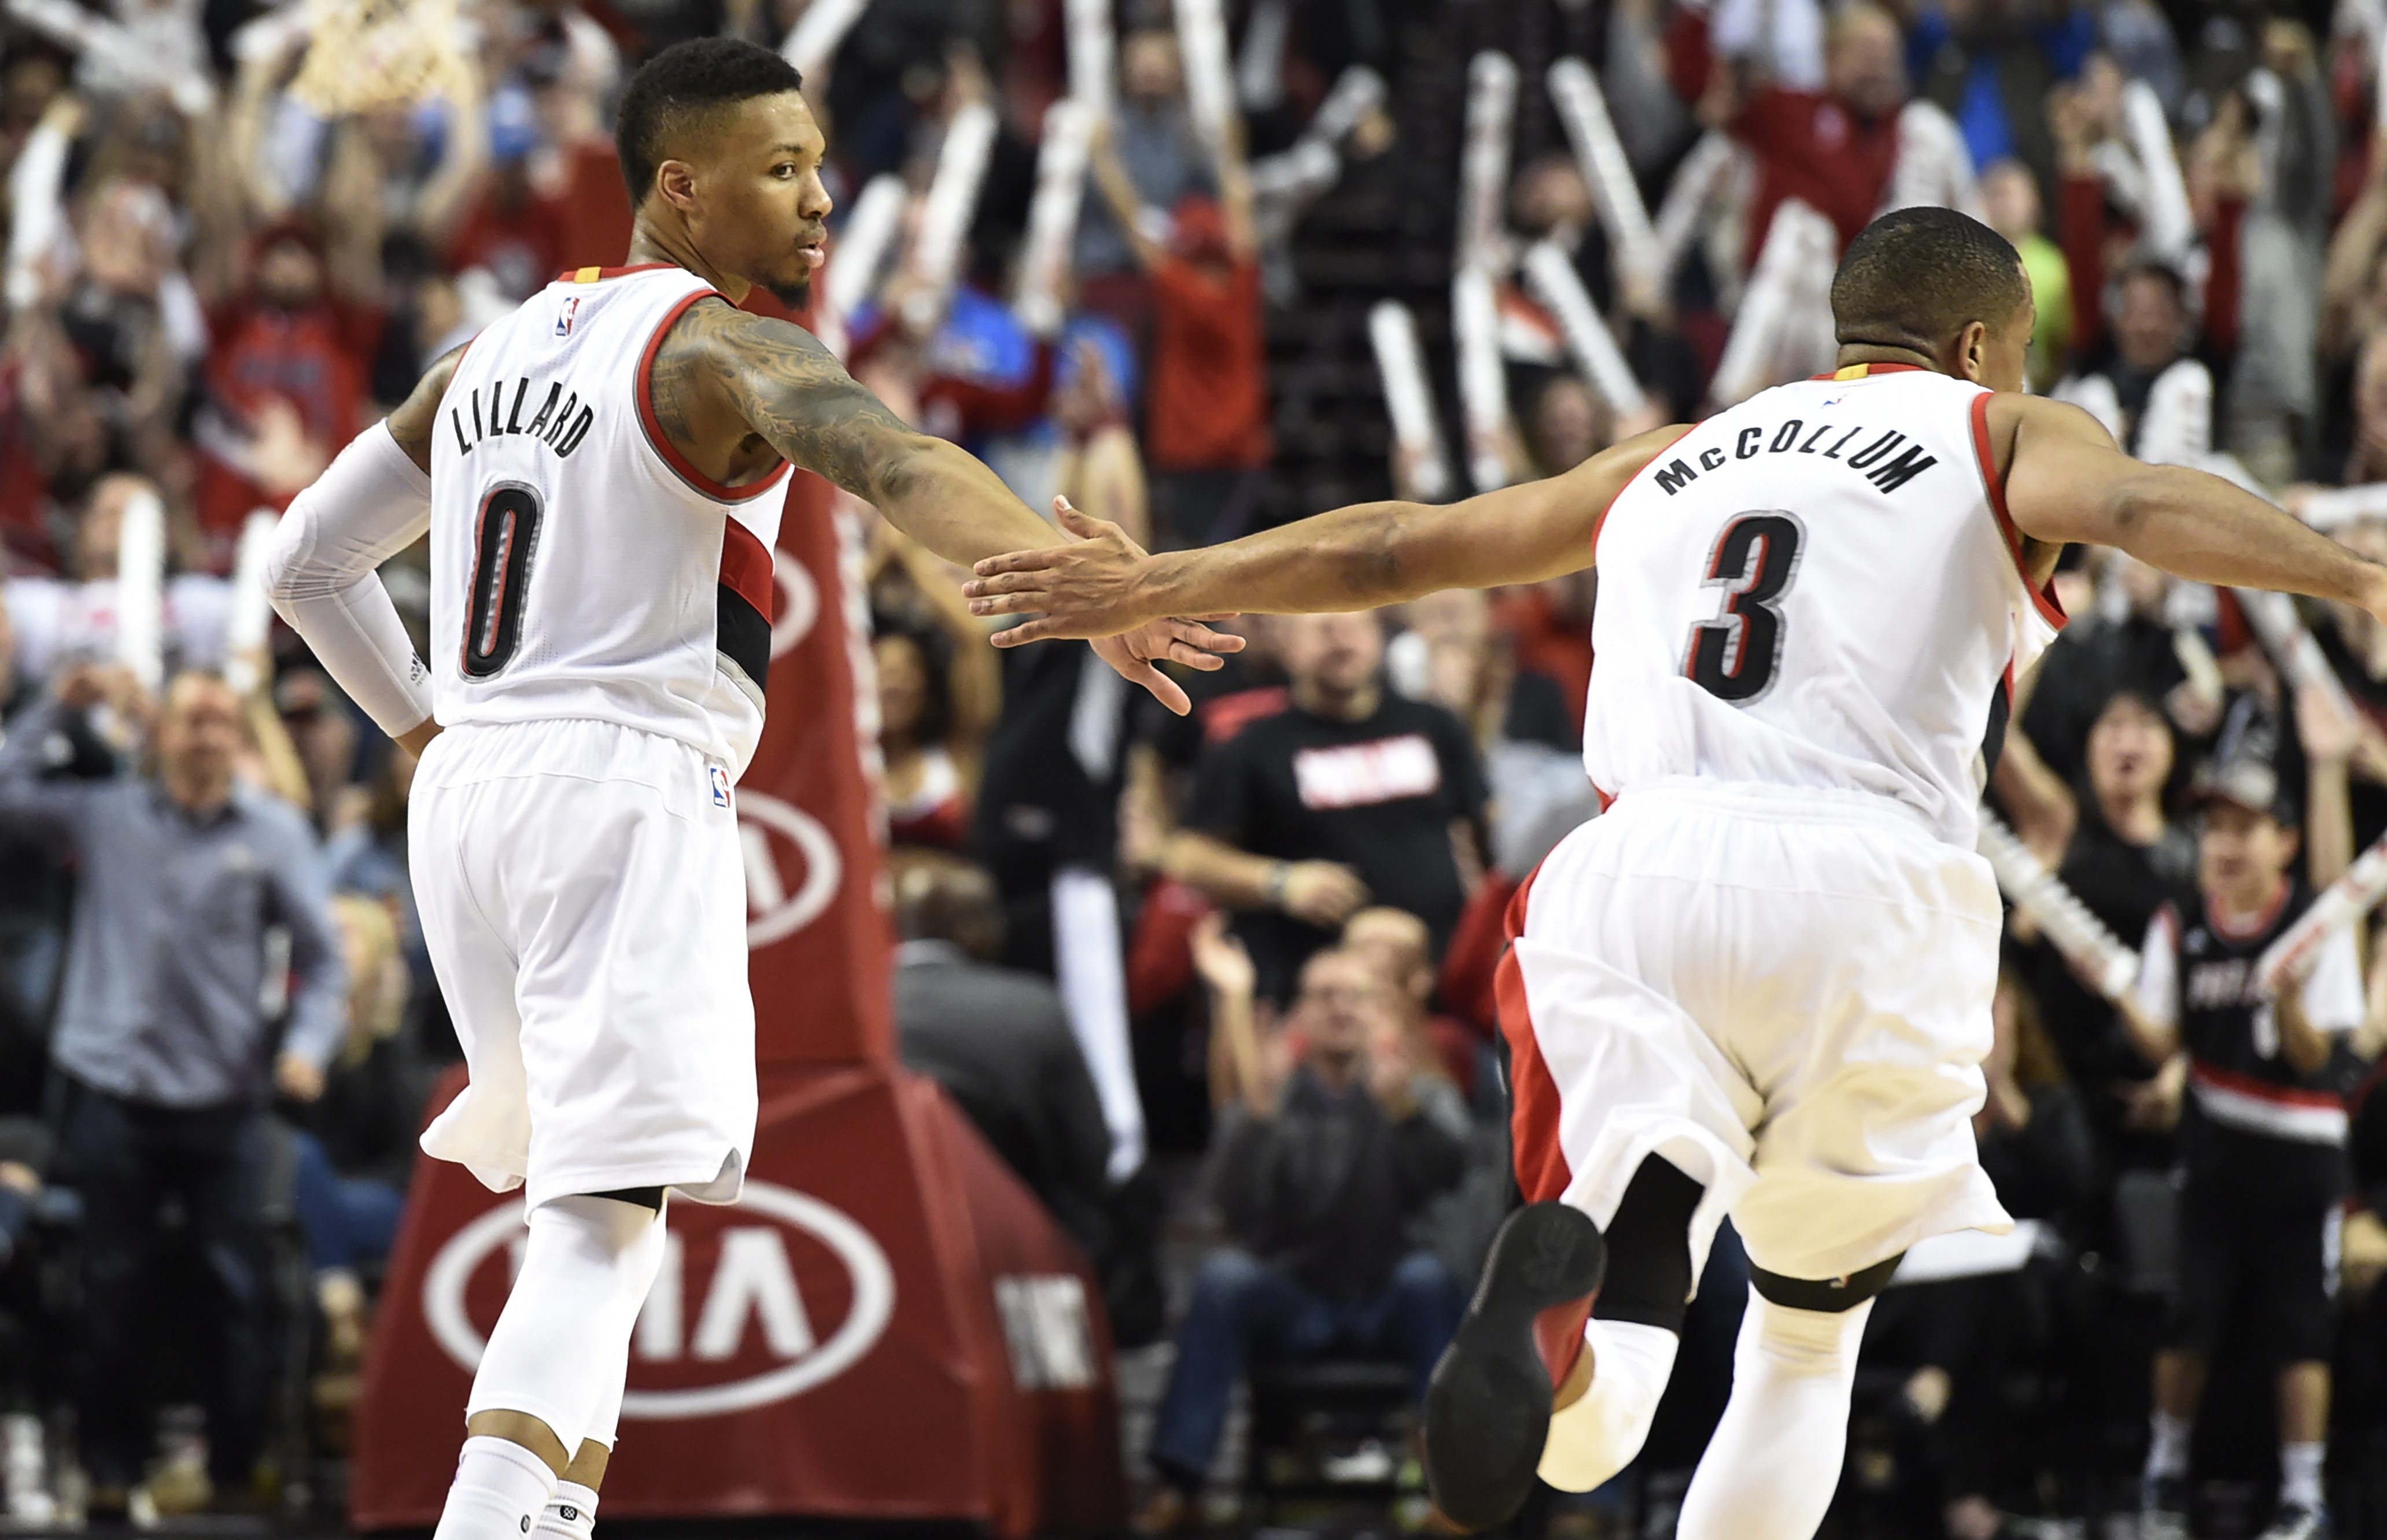 Blazers guard Damian Lillard (0) celebrates with teammate C.J. McCollum (3) after hitting a shot late in the fourth quarter against the Philadelphia 76ers.